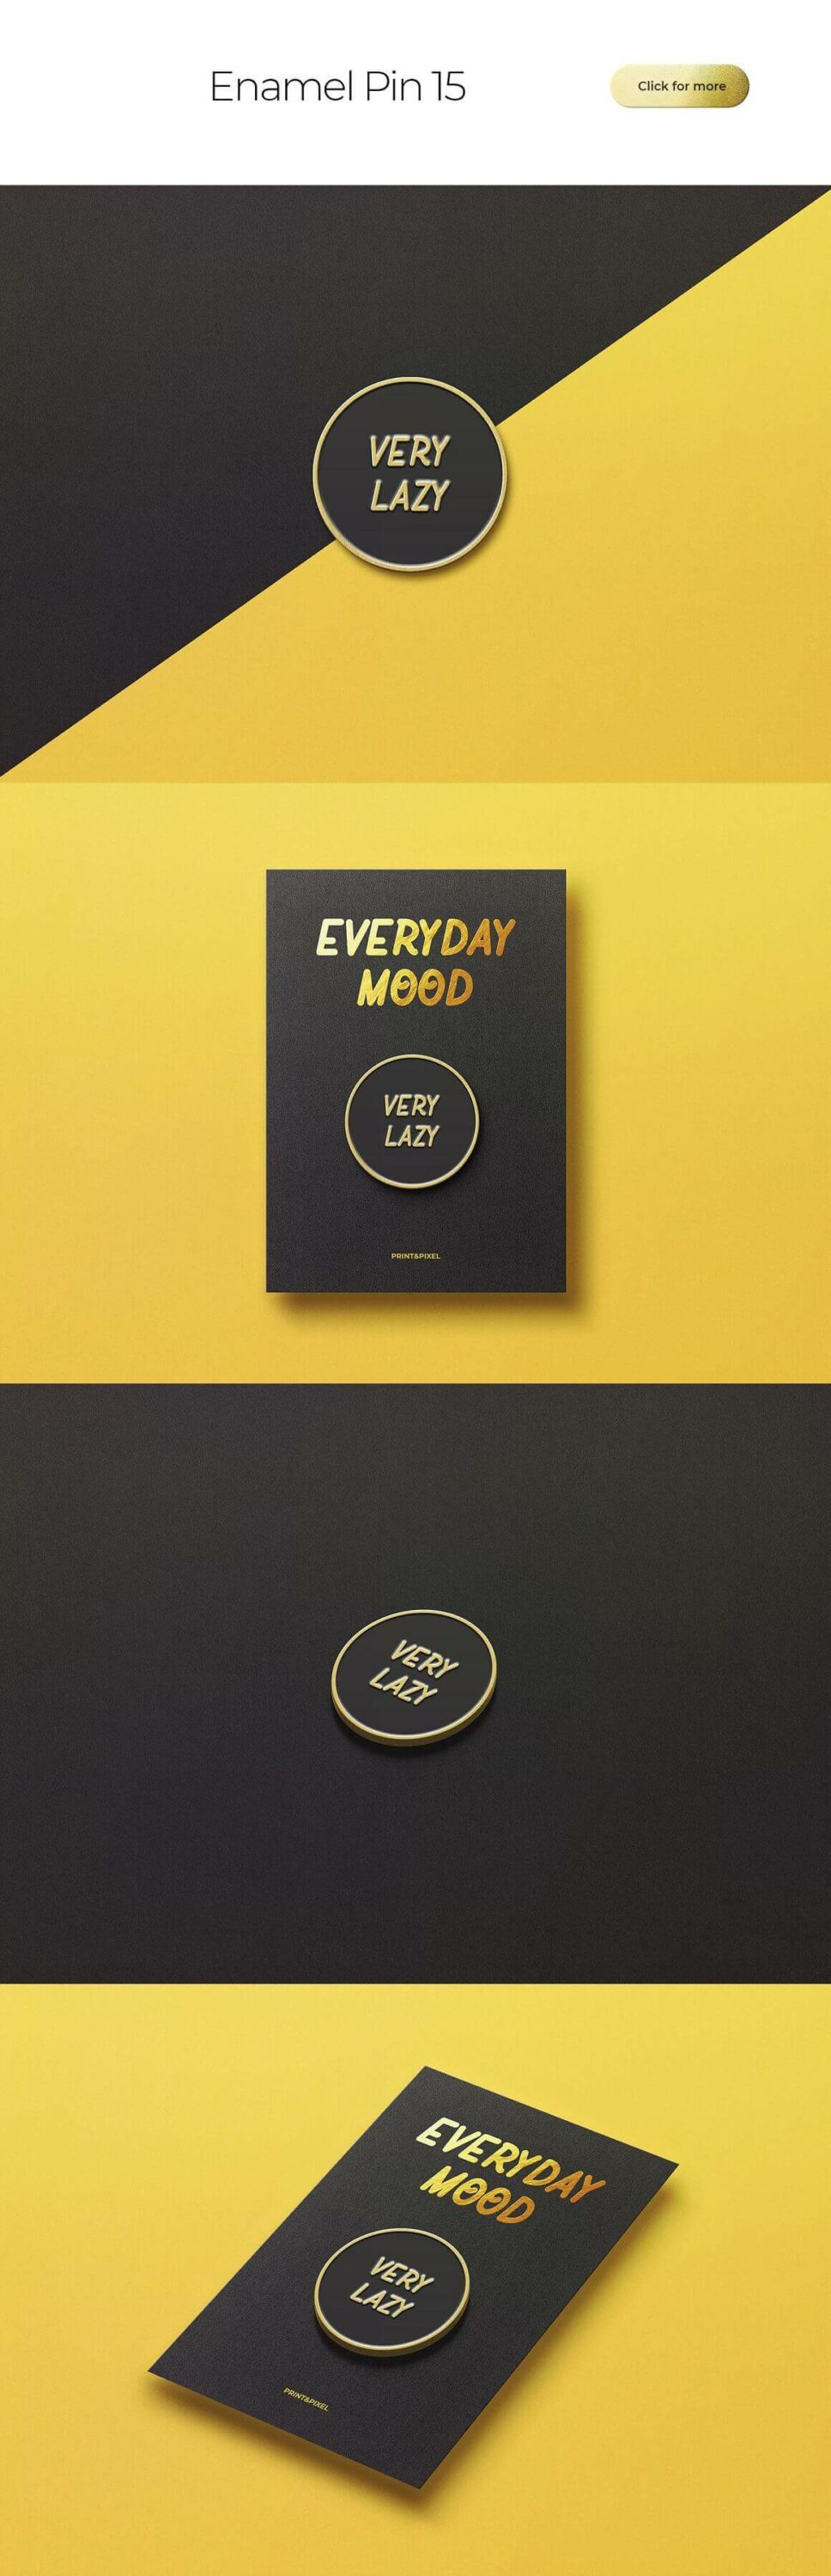 Everyday mood on yellow and black backgrounds.